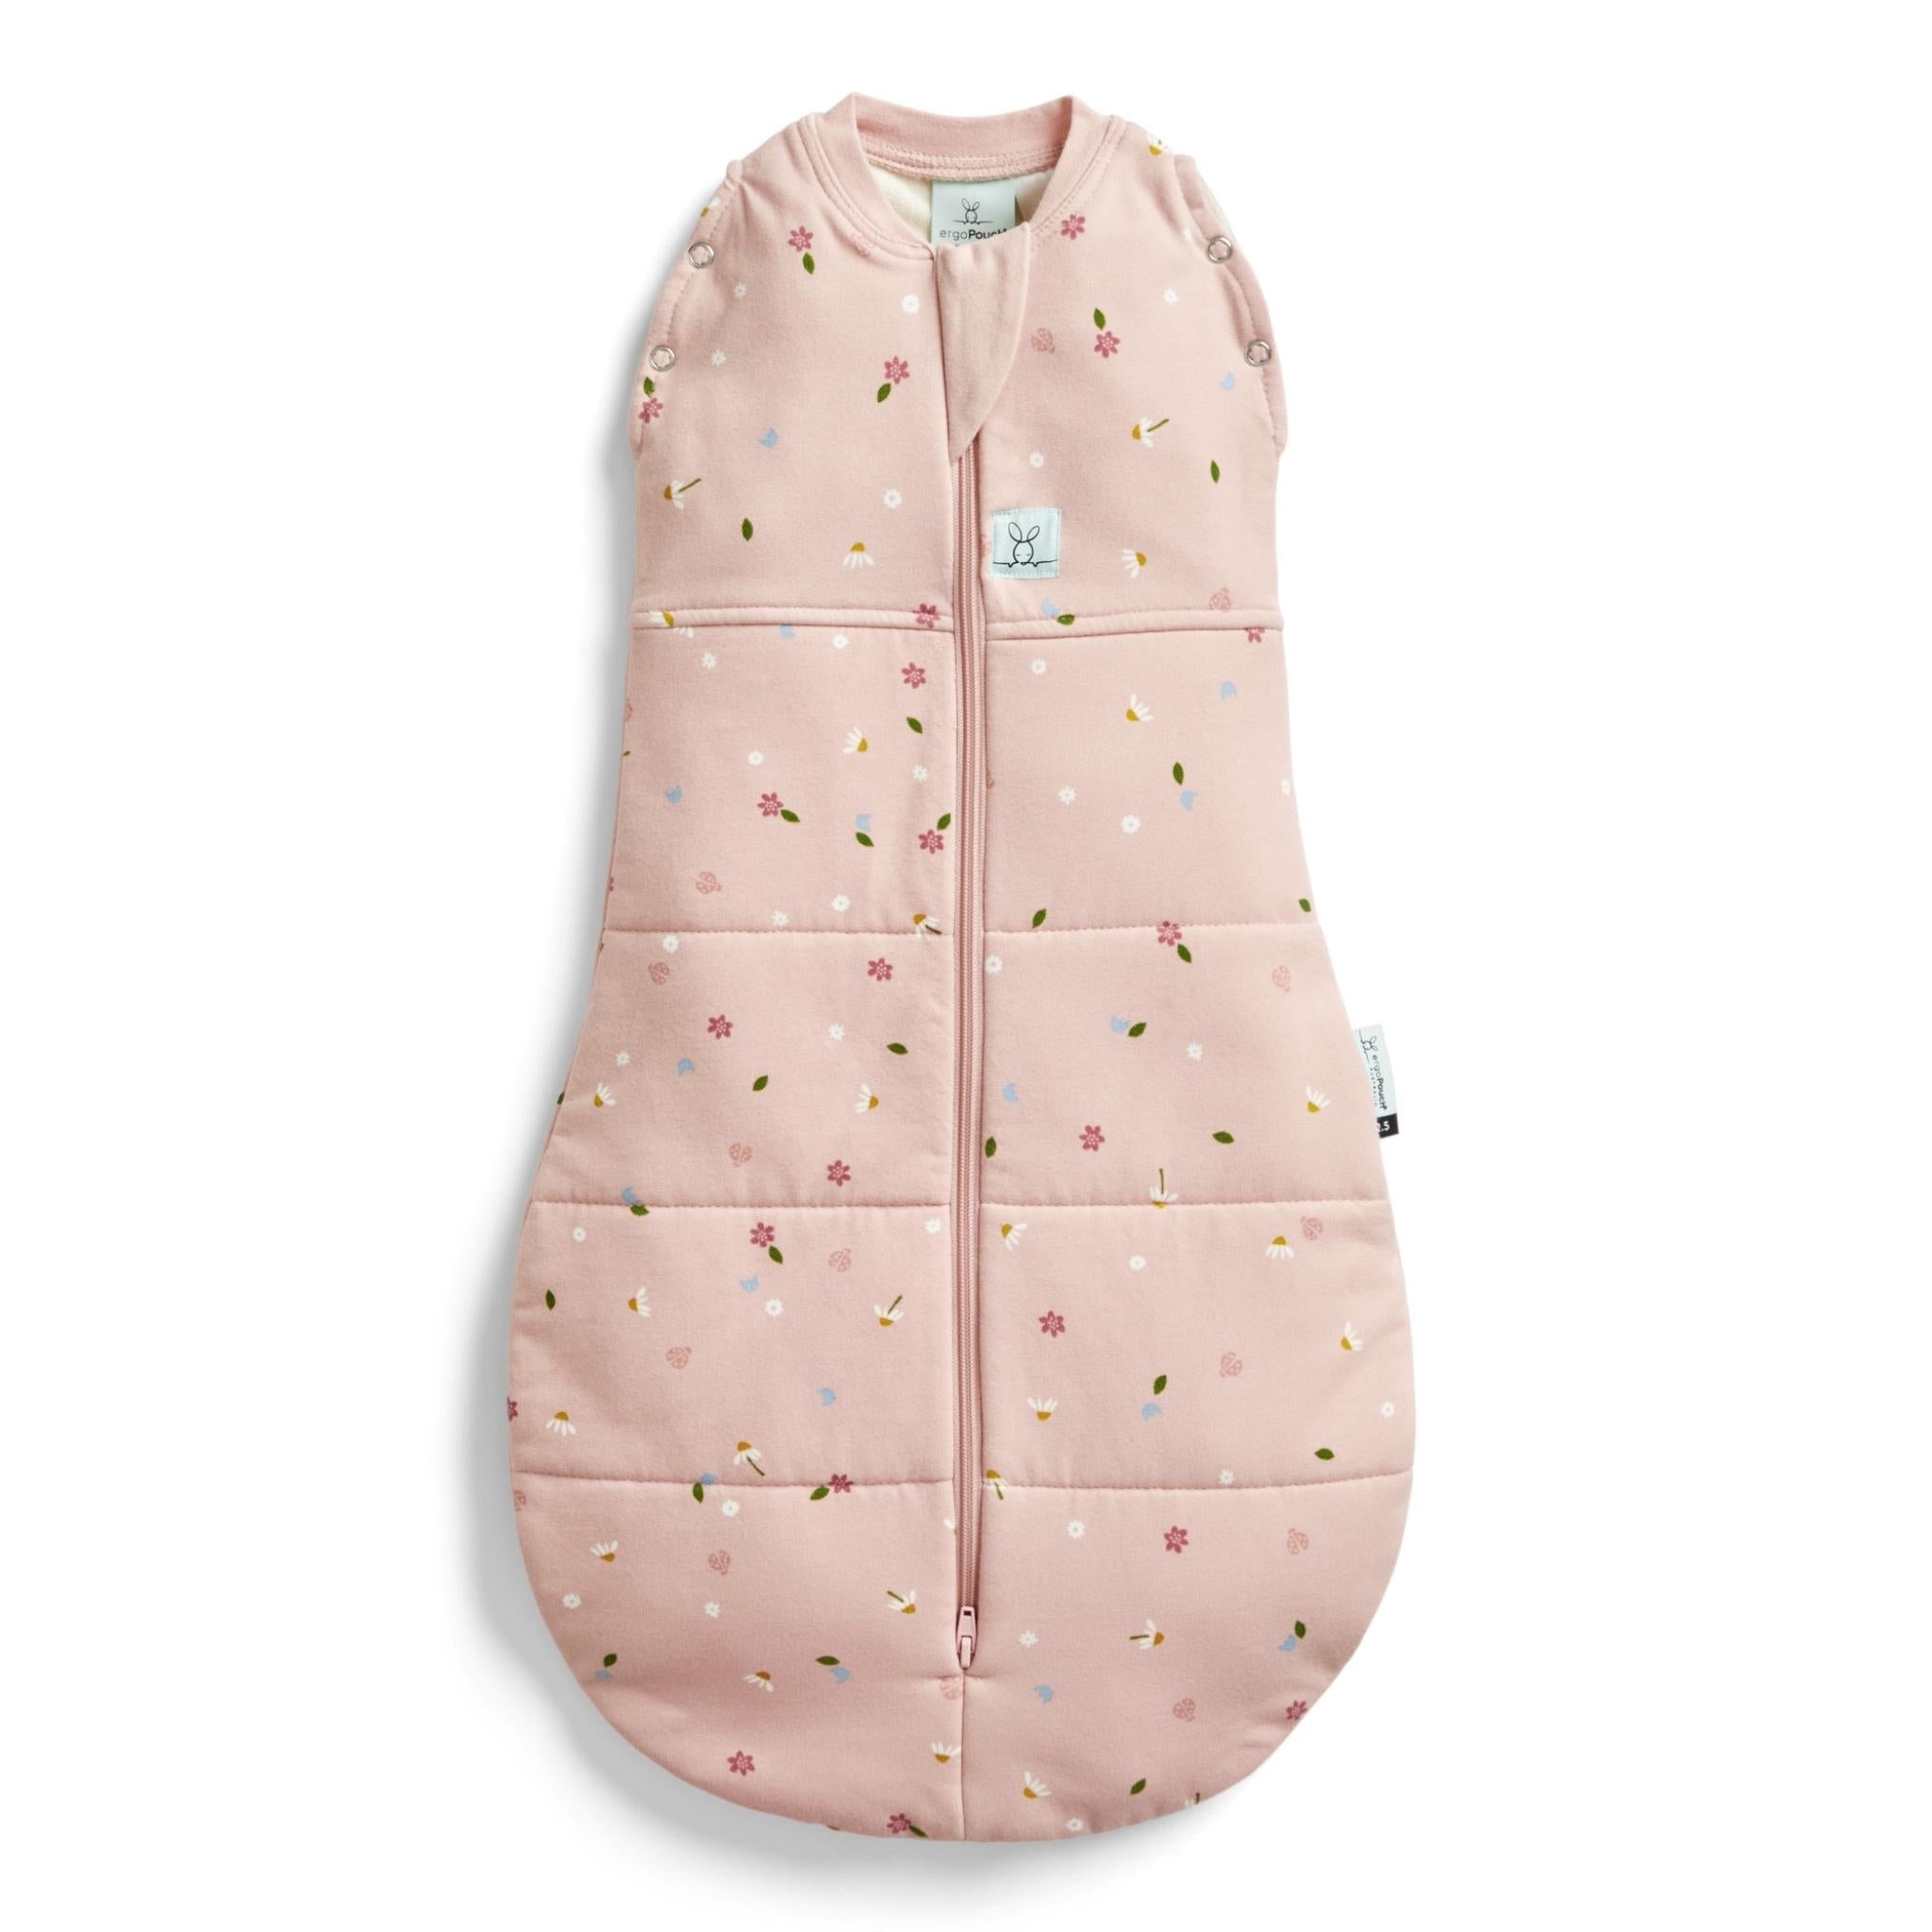 [ergoPouch] エルゴポーチ コクーンスワドル COCOON Swaddle BAG 2.5 TOG DAISIES デイジー 0-3M【正規品】 ZEPCO-2.5T00-00MDA23